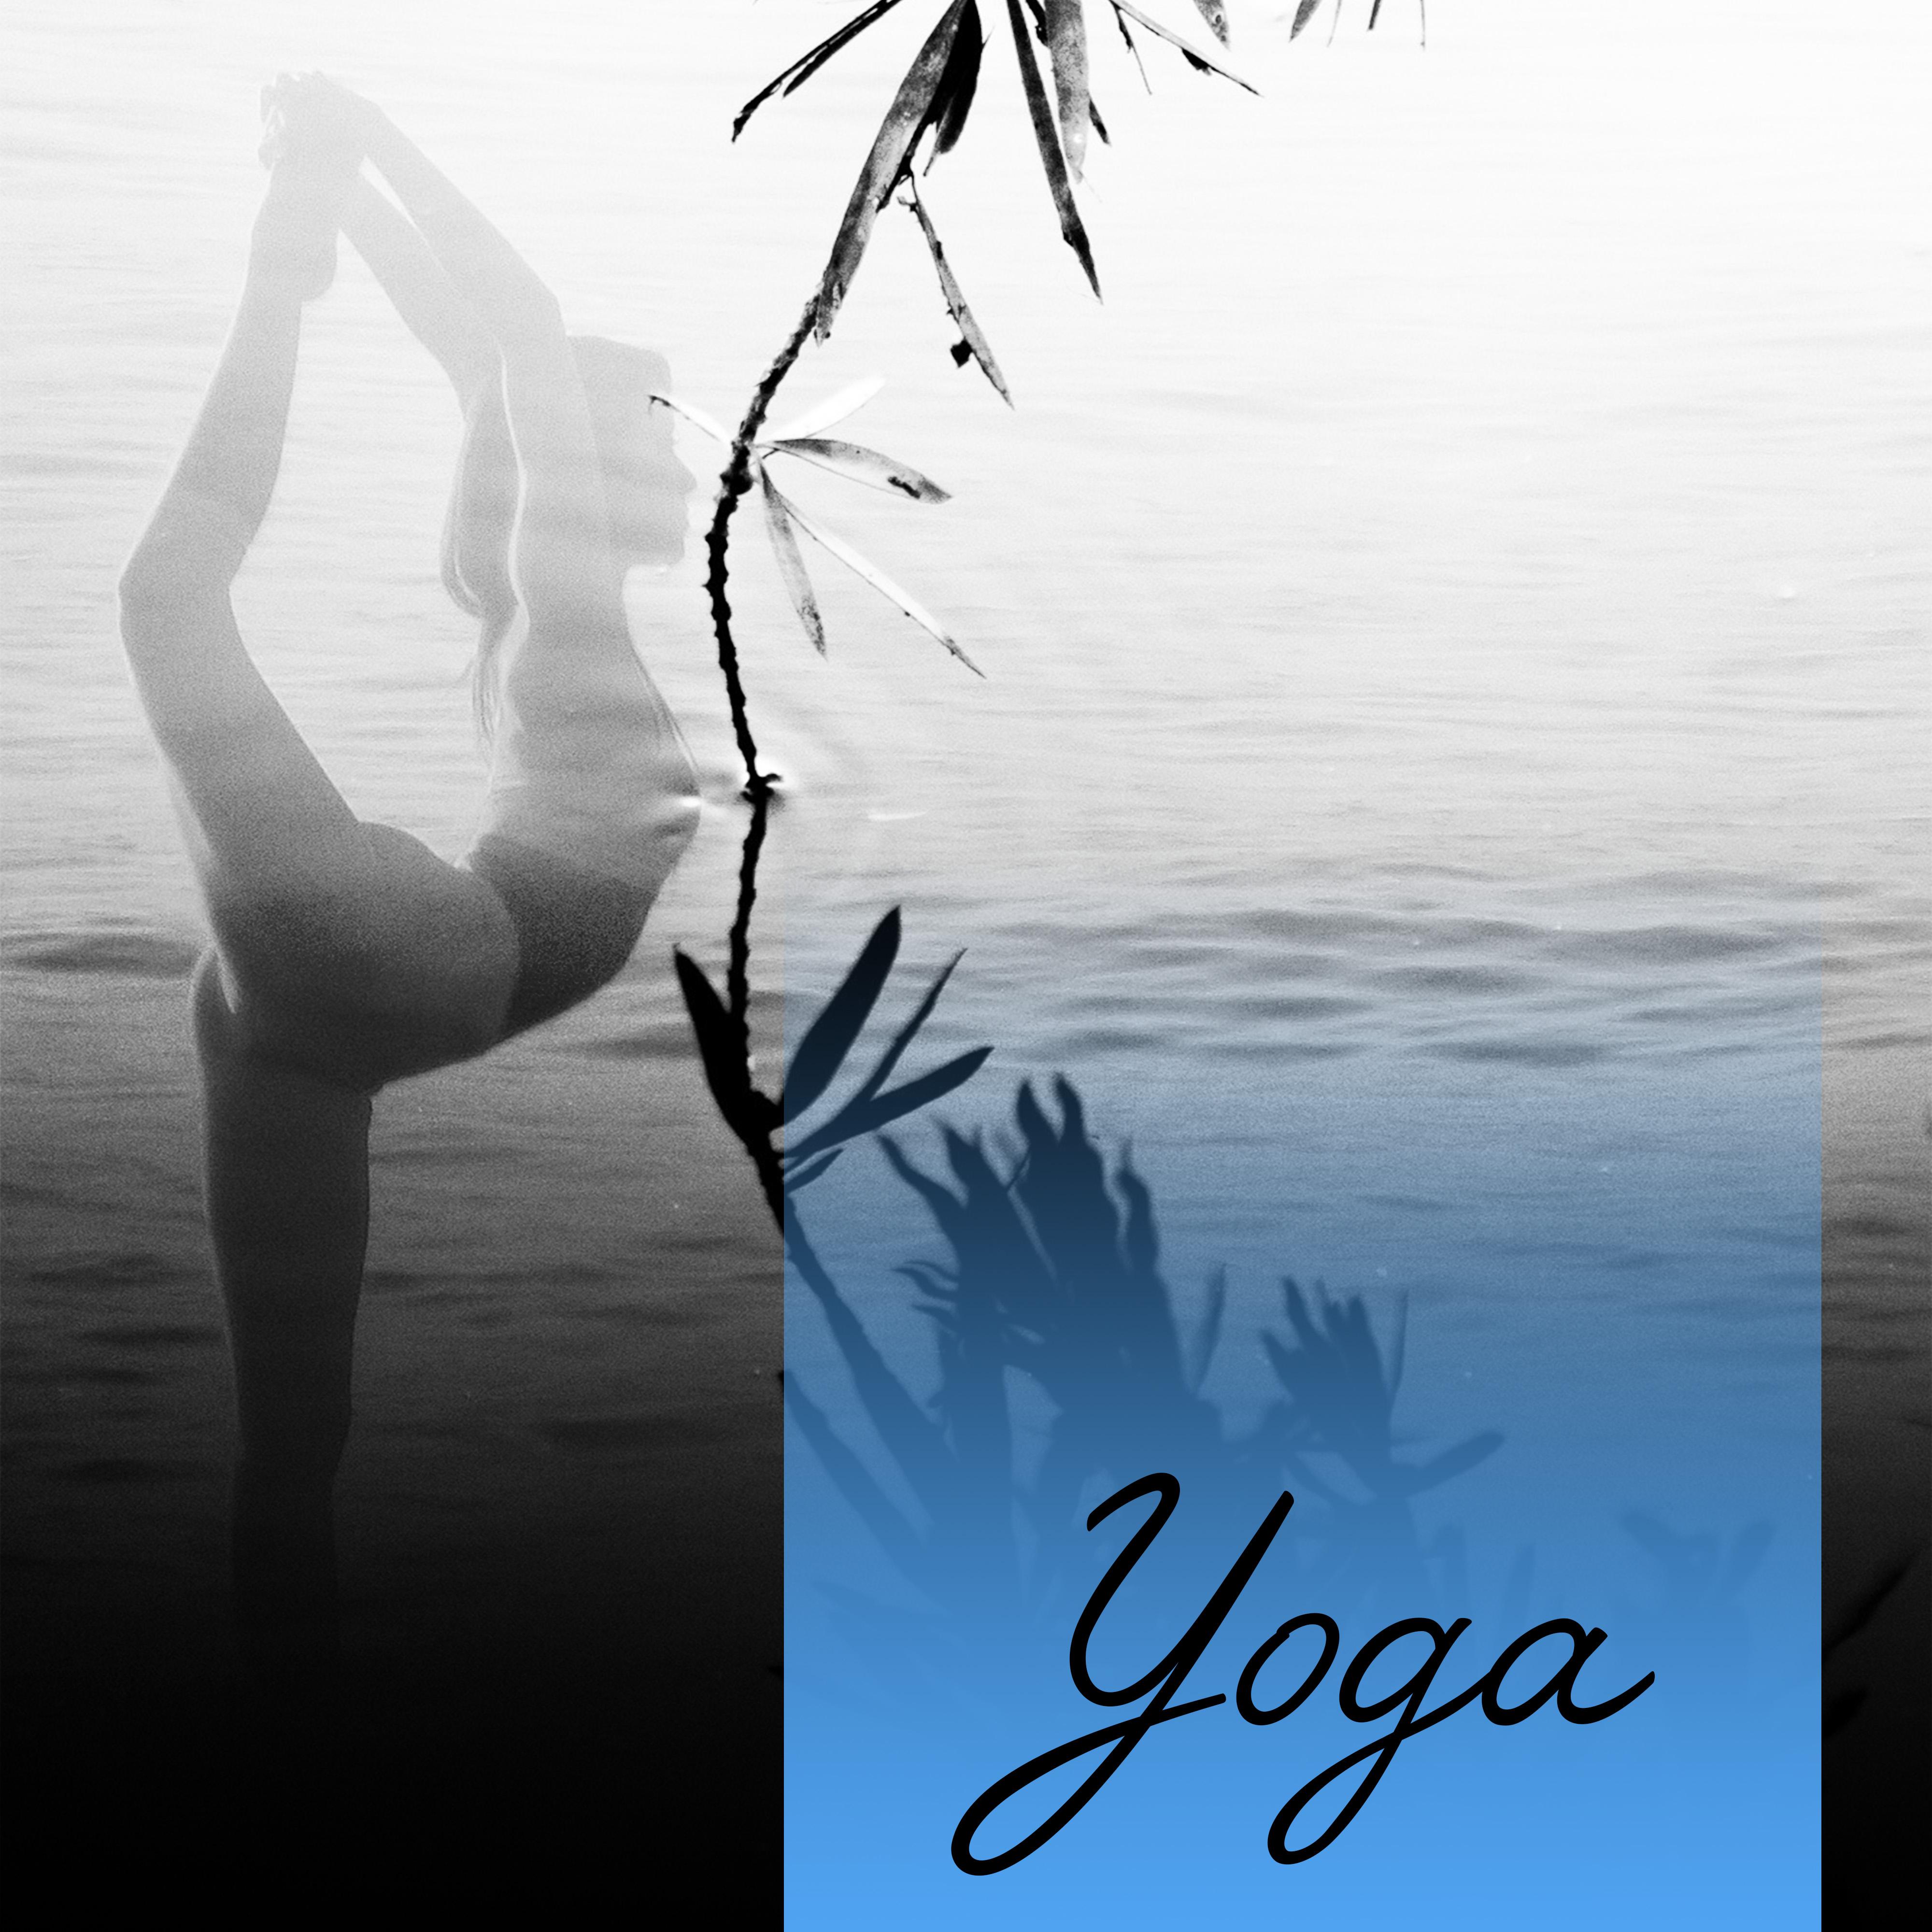 Yoga – Soft Music for Meditation, Train Your Mind, Yoga Healing, Concentration, Harmony, Relaxation, Pure Mind